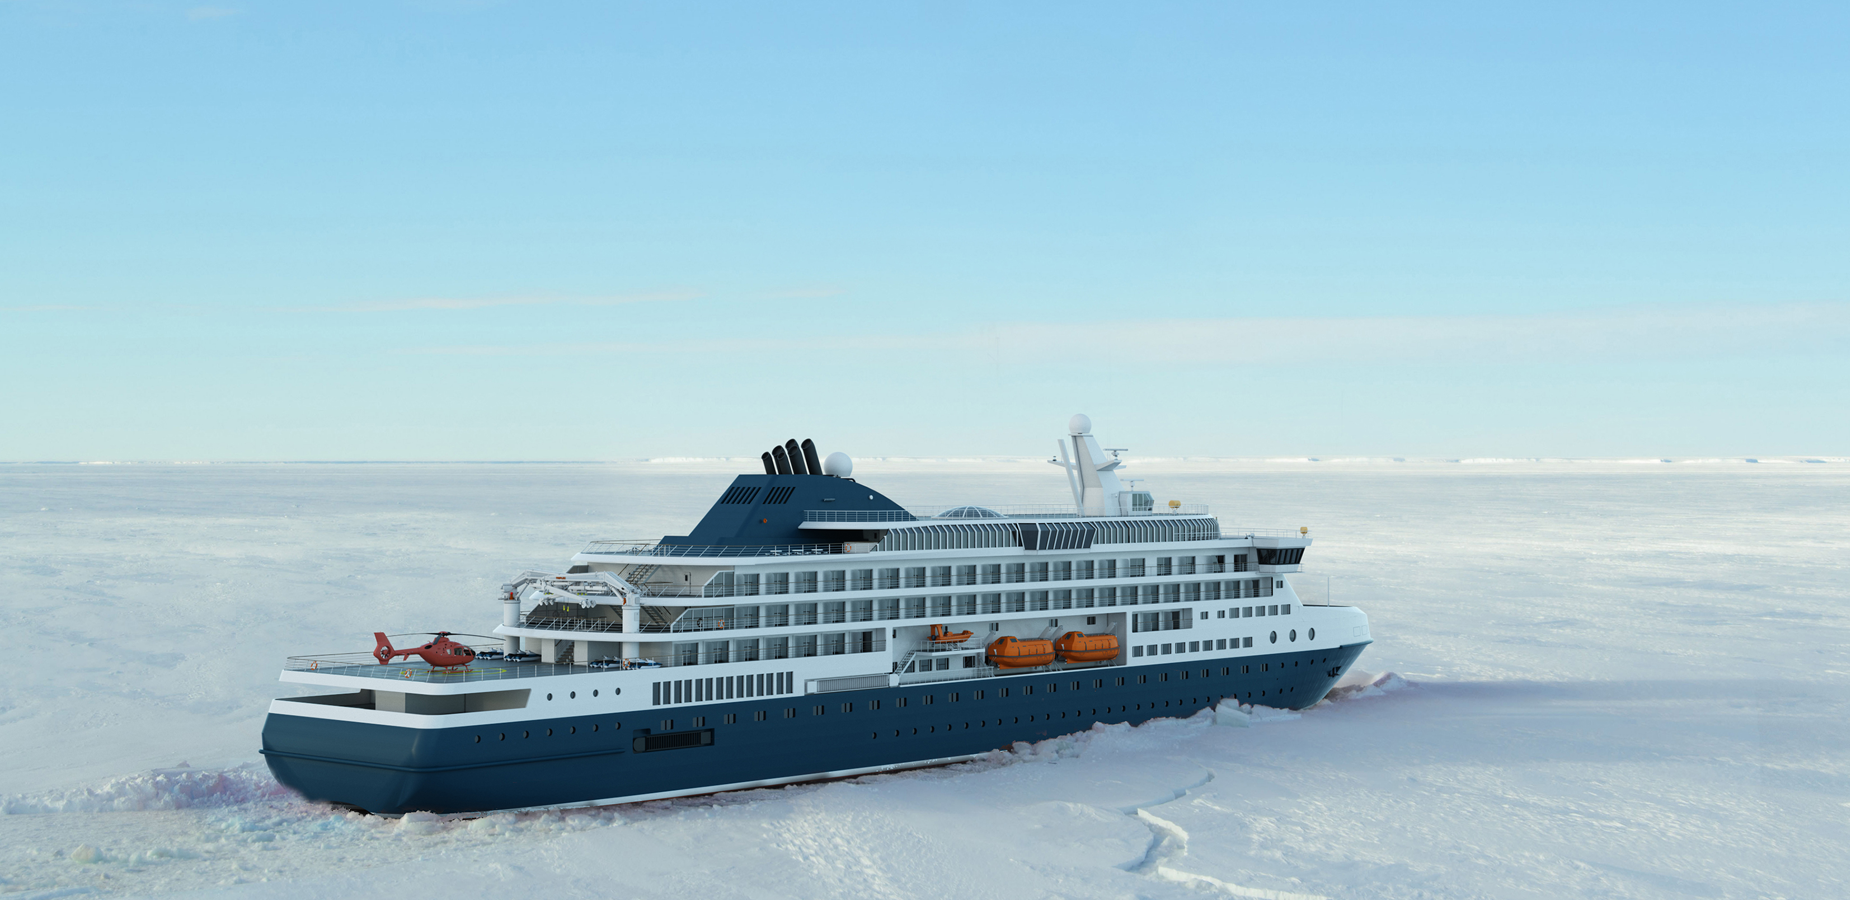 KNUD E. HANSEN introduces new design of icebreaking expedition cruise vessel